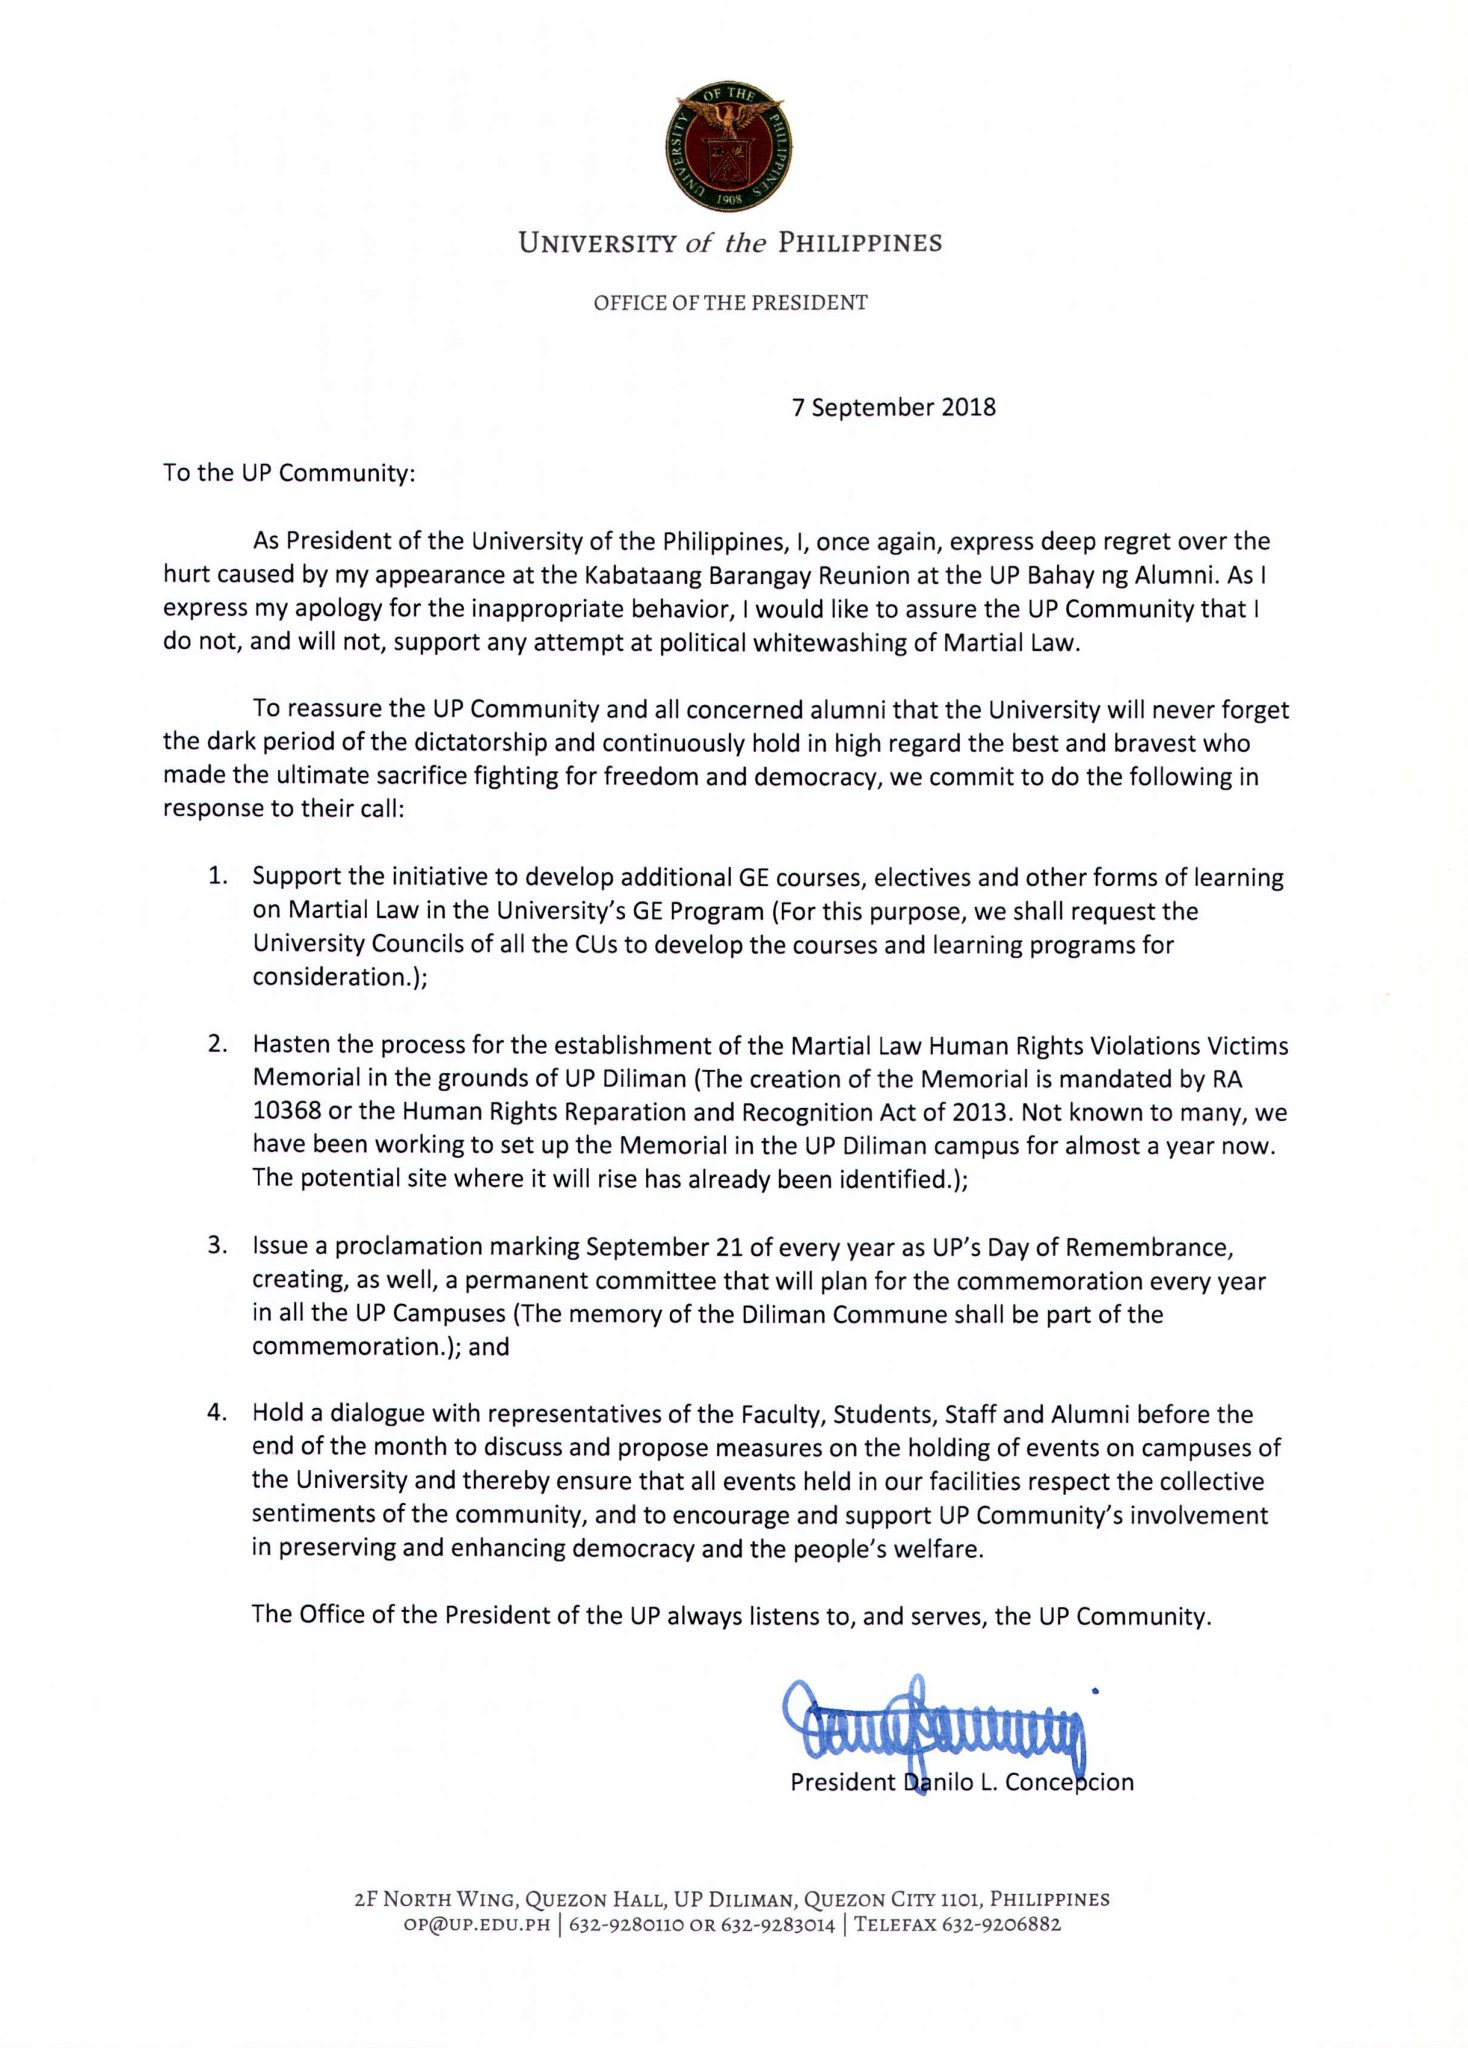 University of the Philippines on Twitter: "A Letter from ...